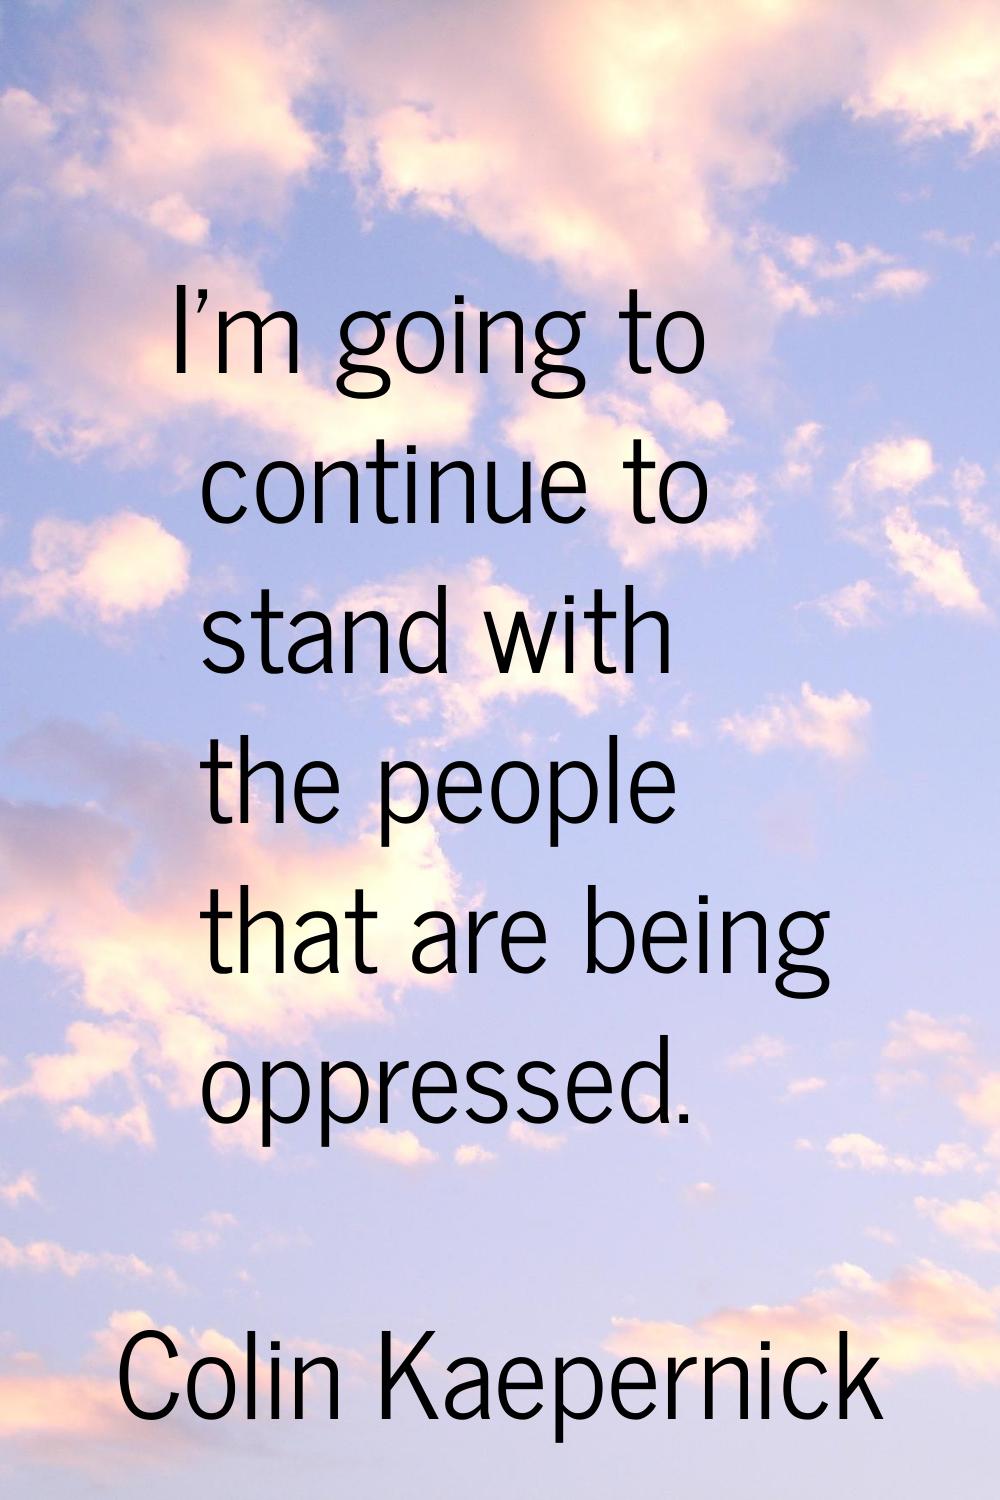 I'm going to continue to stand with the people that are being oppressed.